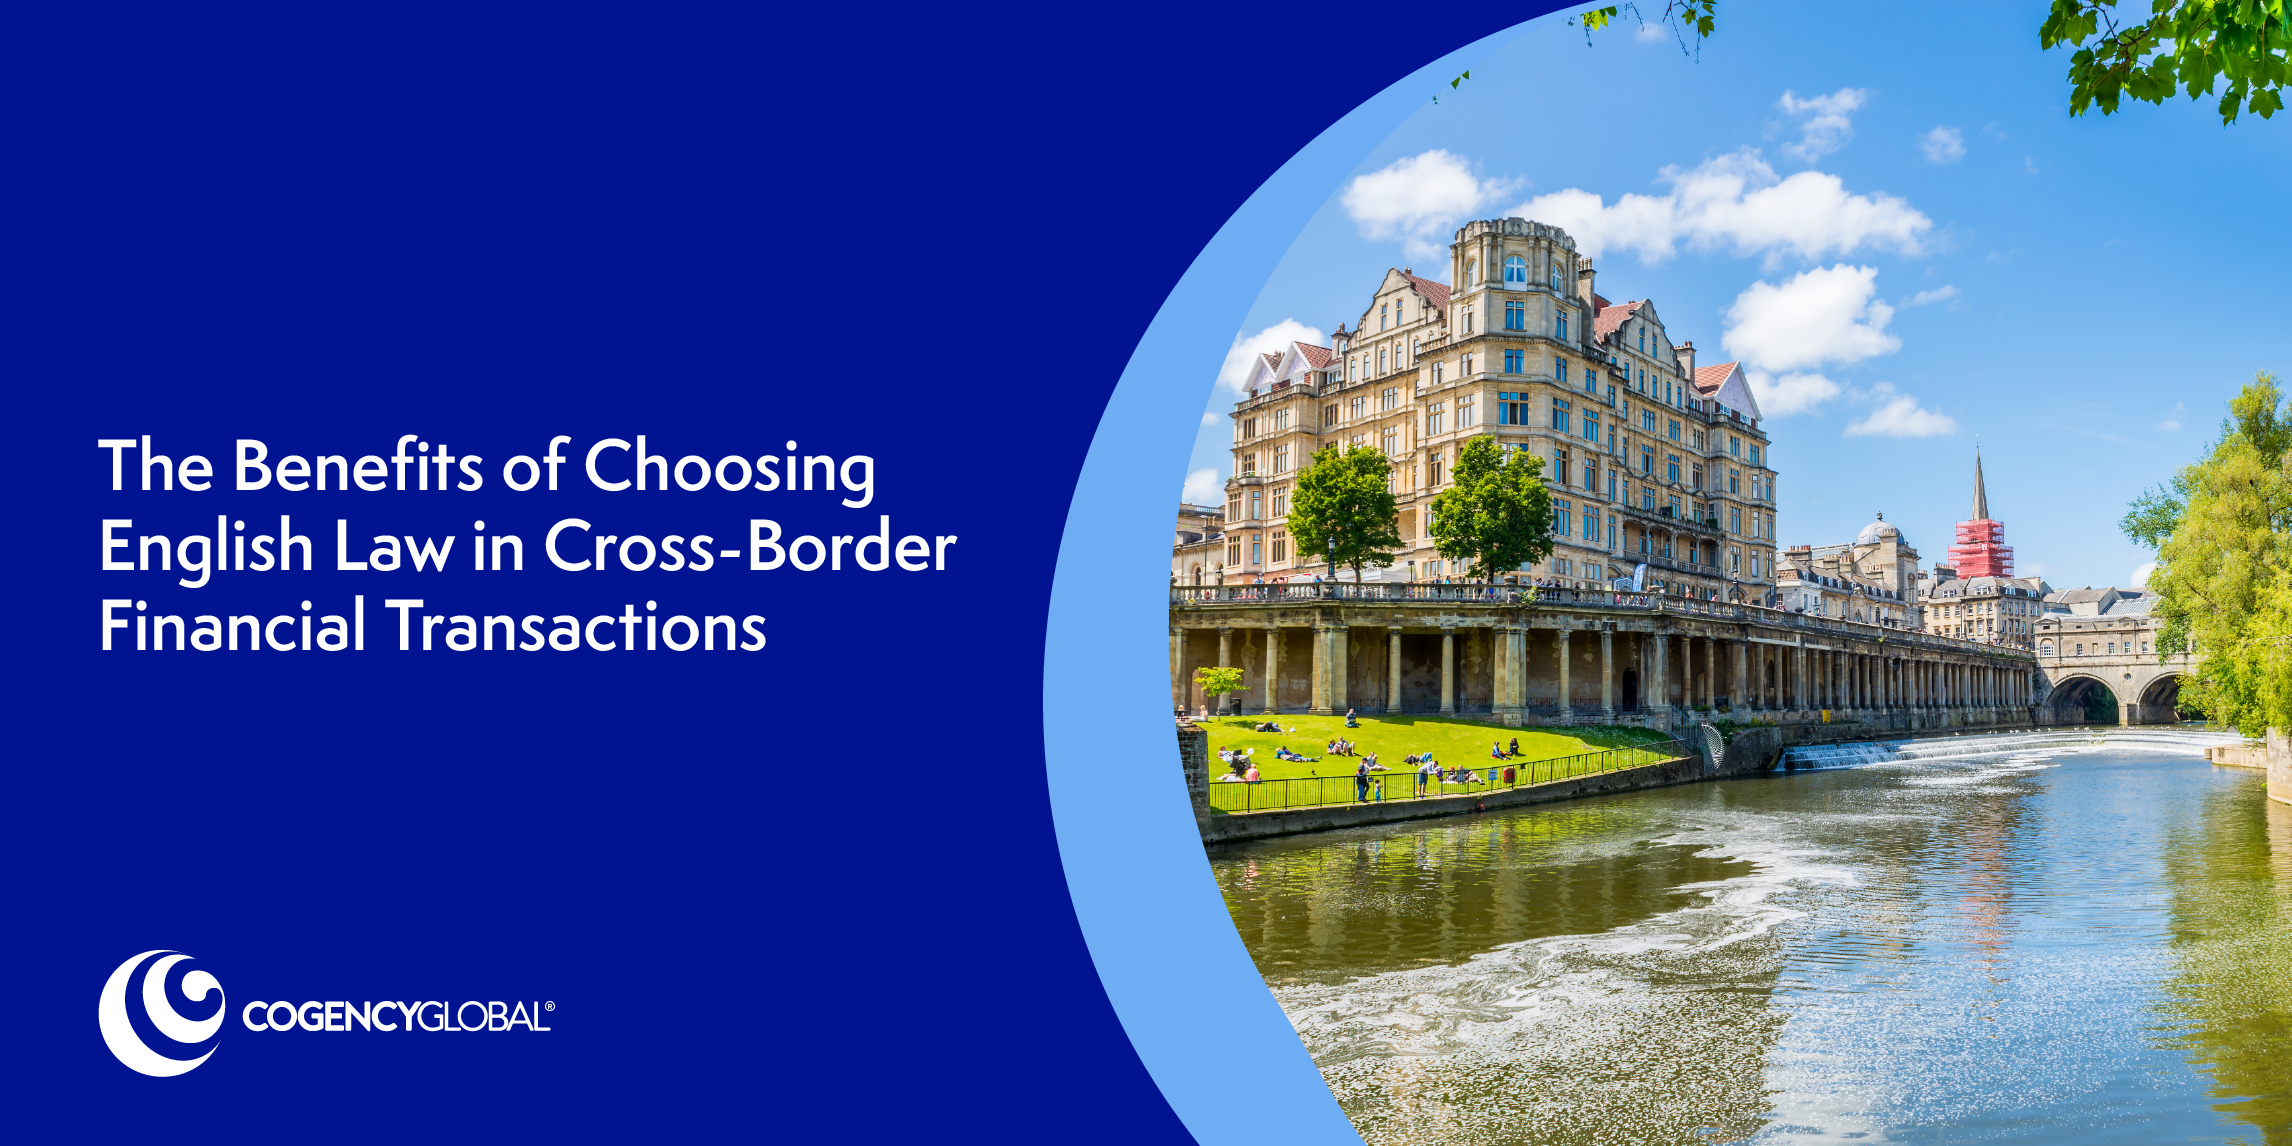 The Benefits of Choosing English Law in Cross-Border Financial Transactions